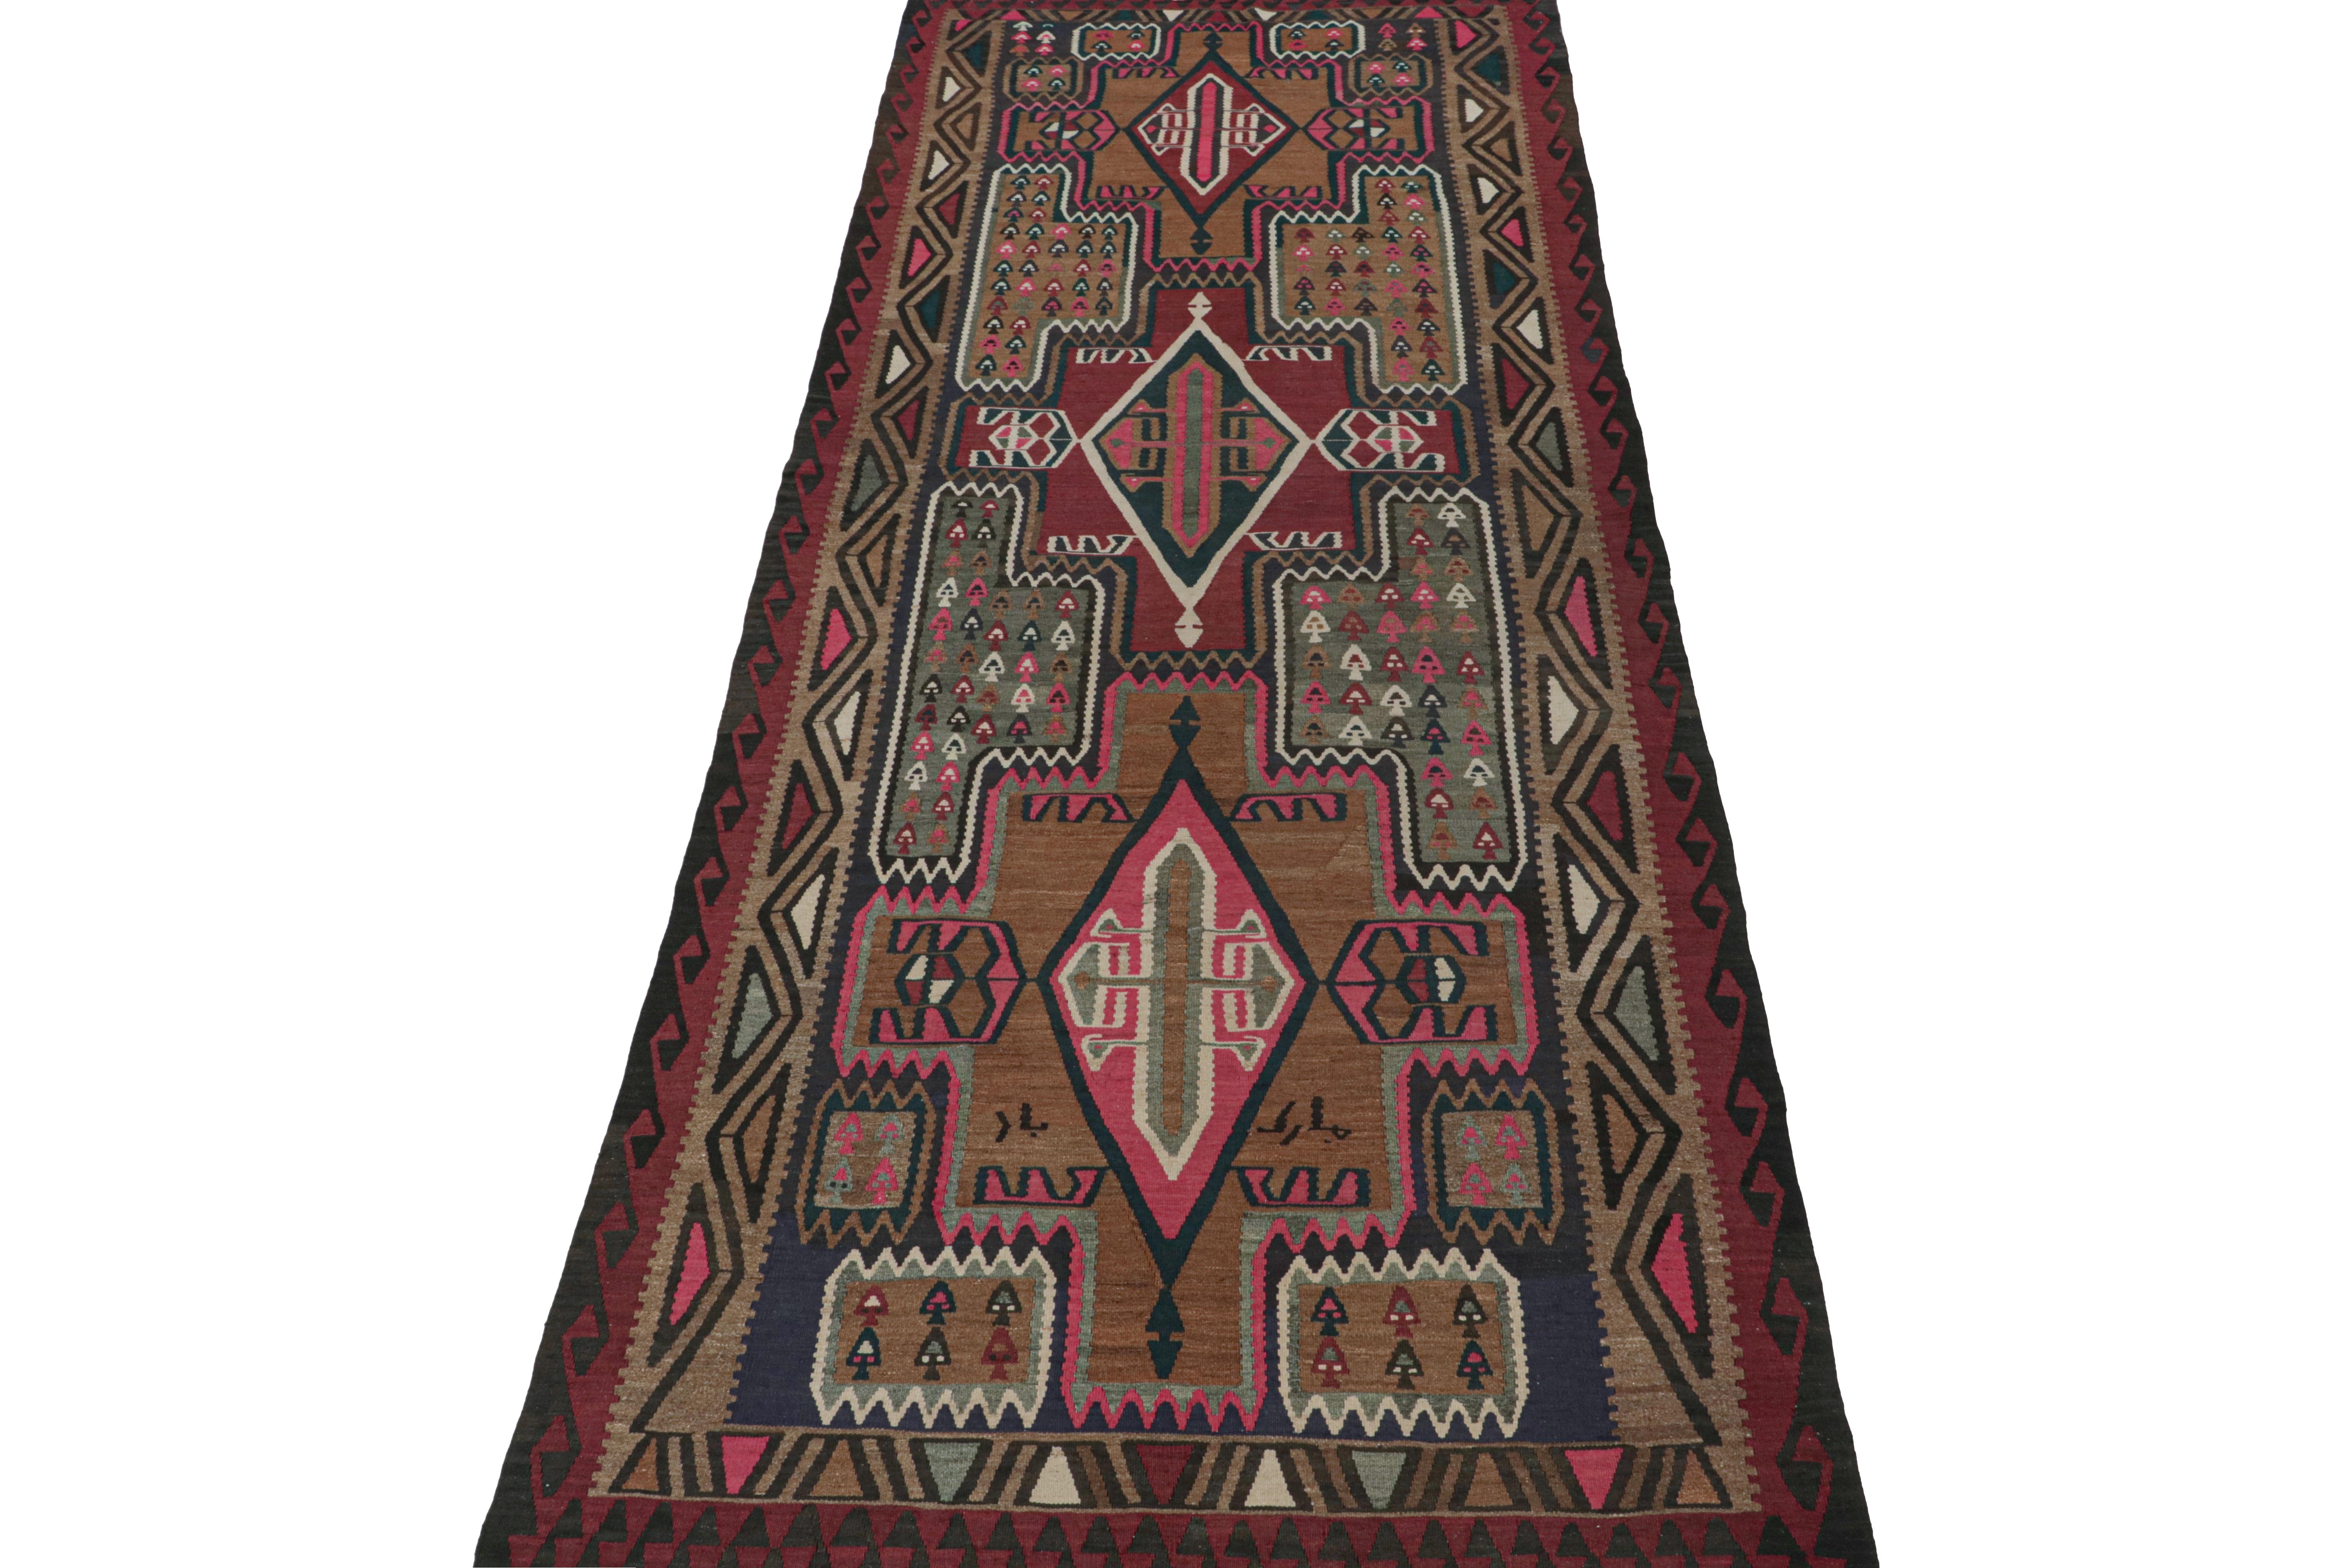 This vintage 6x14 Persian Kilim and gallery runner is believed to be a tribal rug from Meshkin.

Handwoven in wool circa 1950-1960, this small Northwest Persian village is a long-known center of acclaim for fabulous works. This design favors